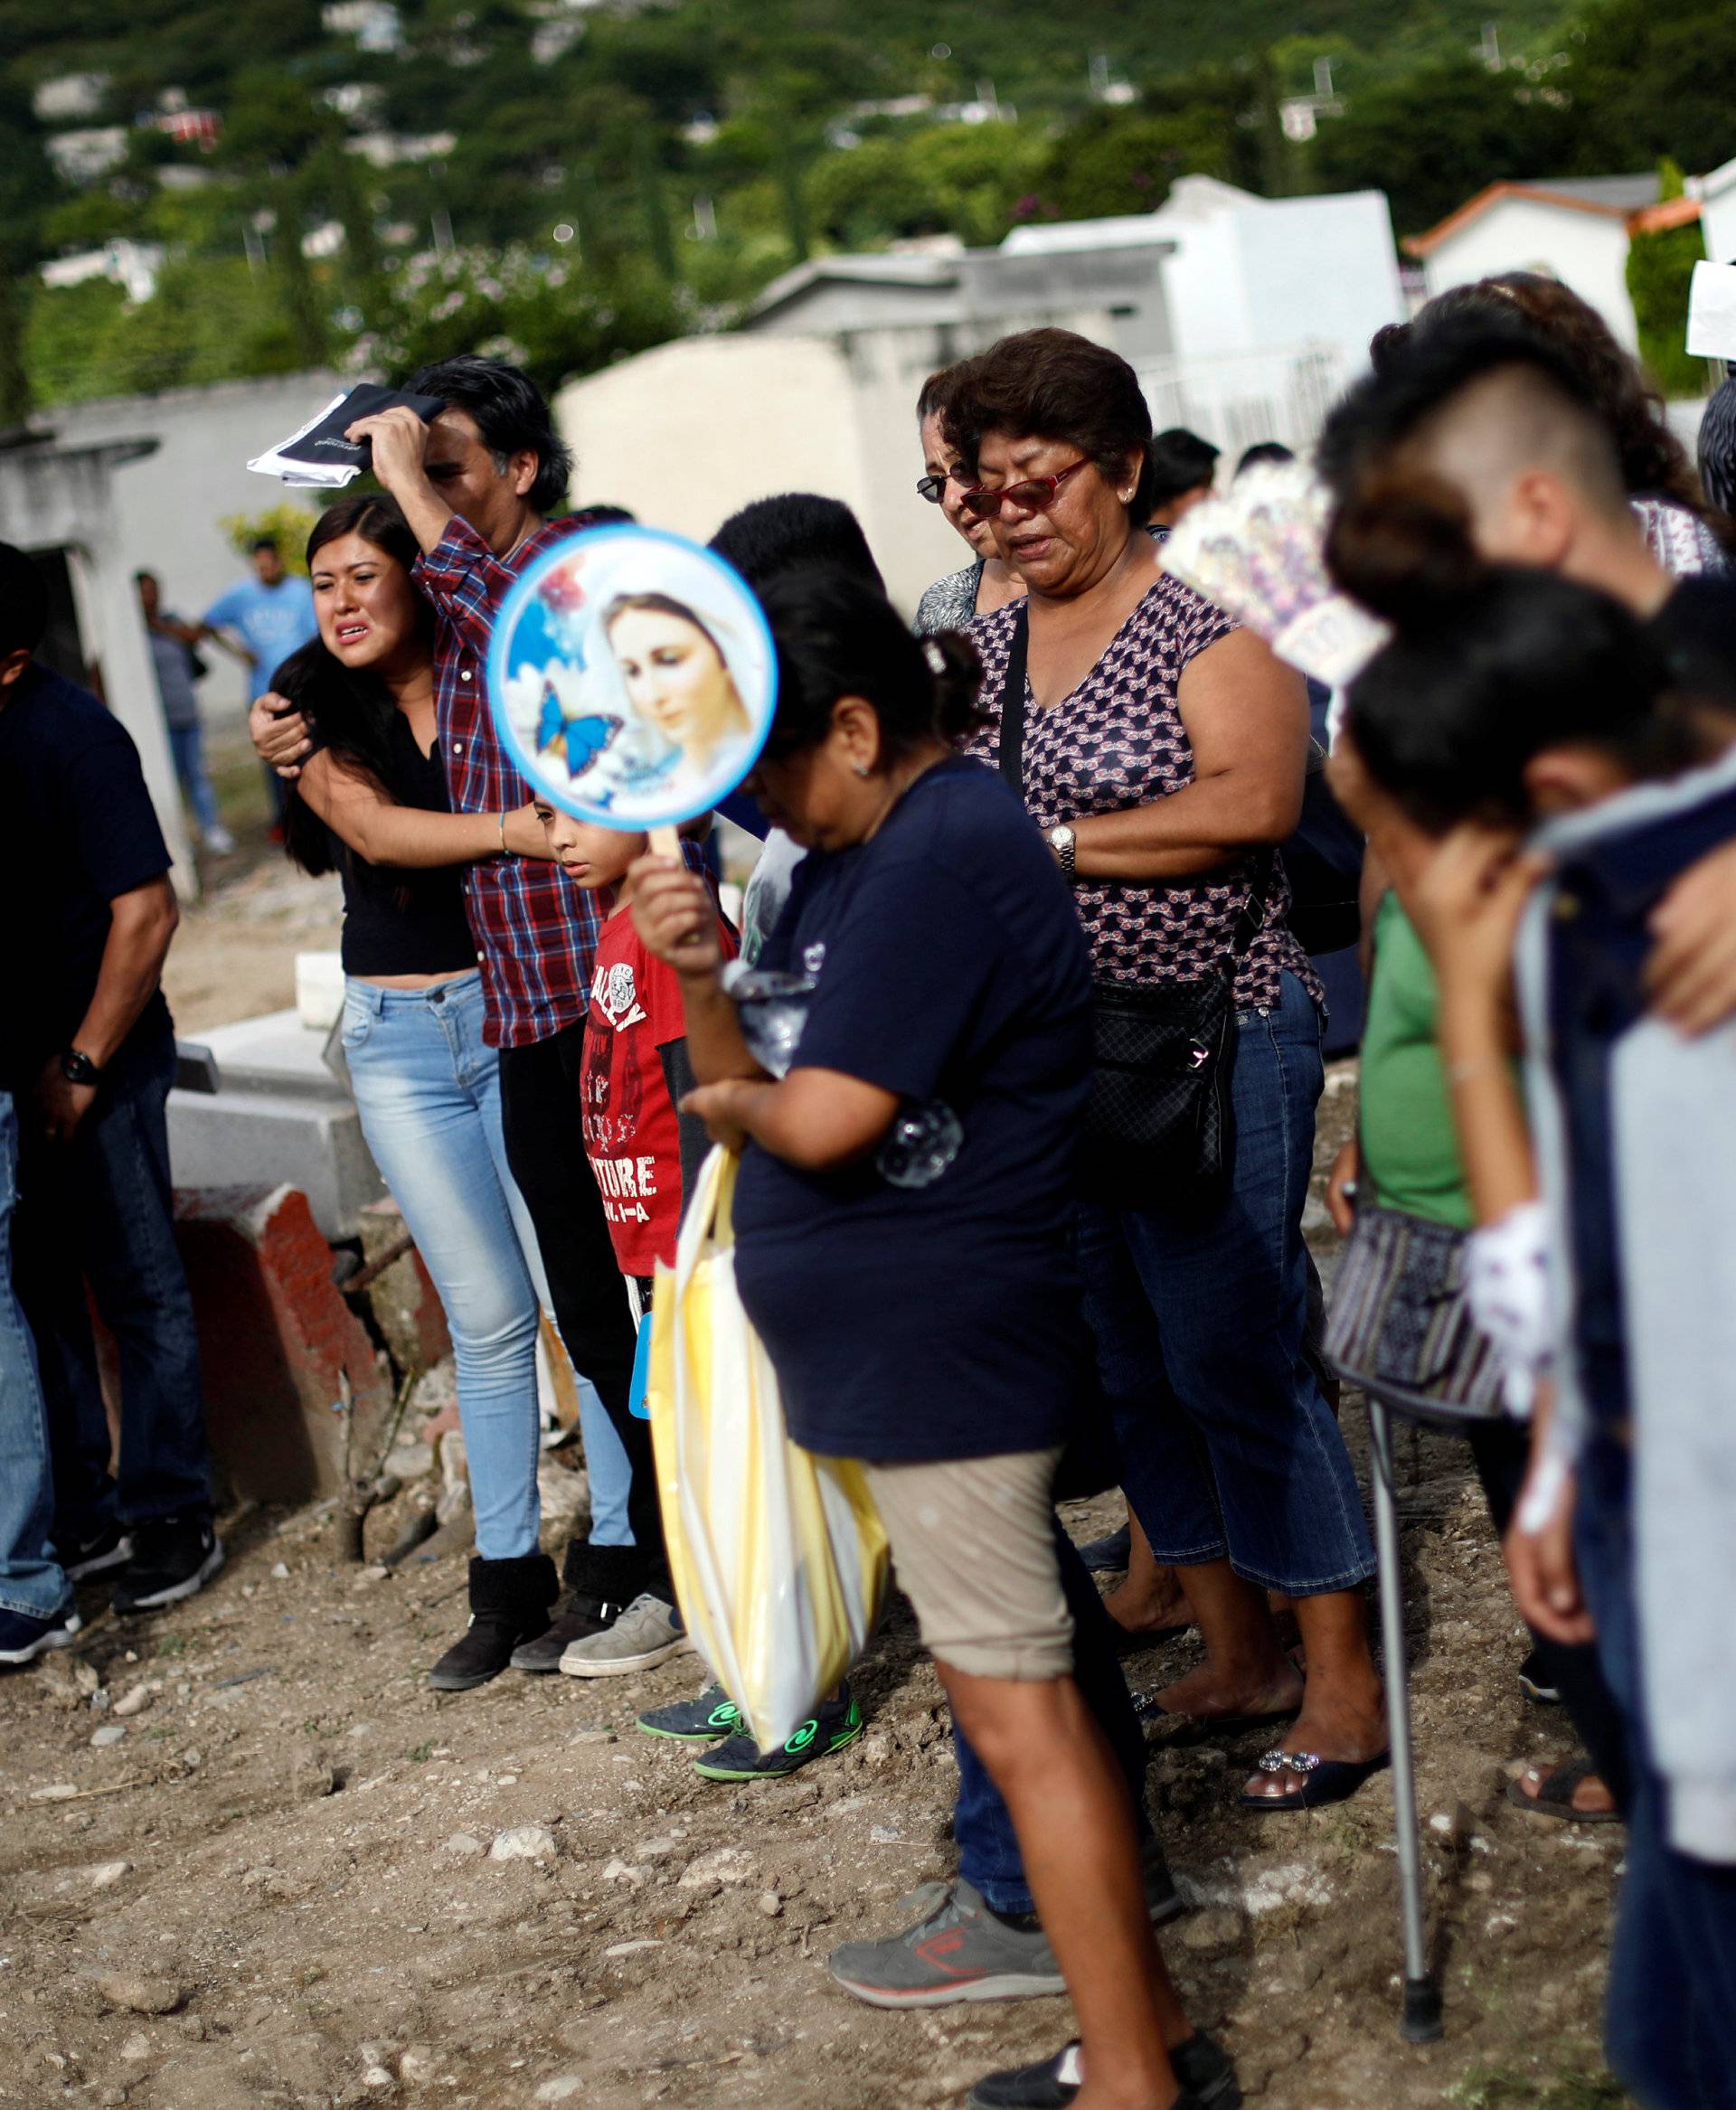 Family members and friends attend the funeral of a woman who was killed in an earthquake, in Jojutla de Juarez